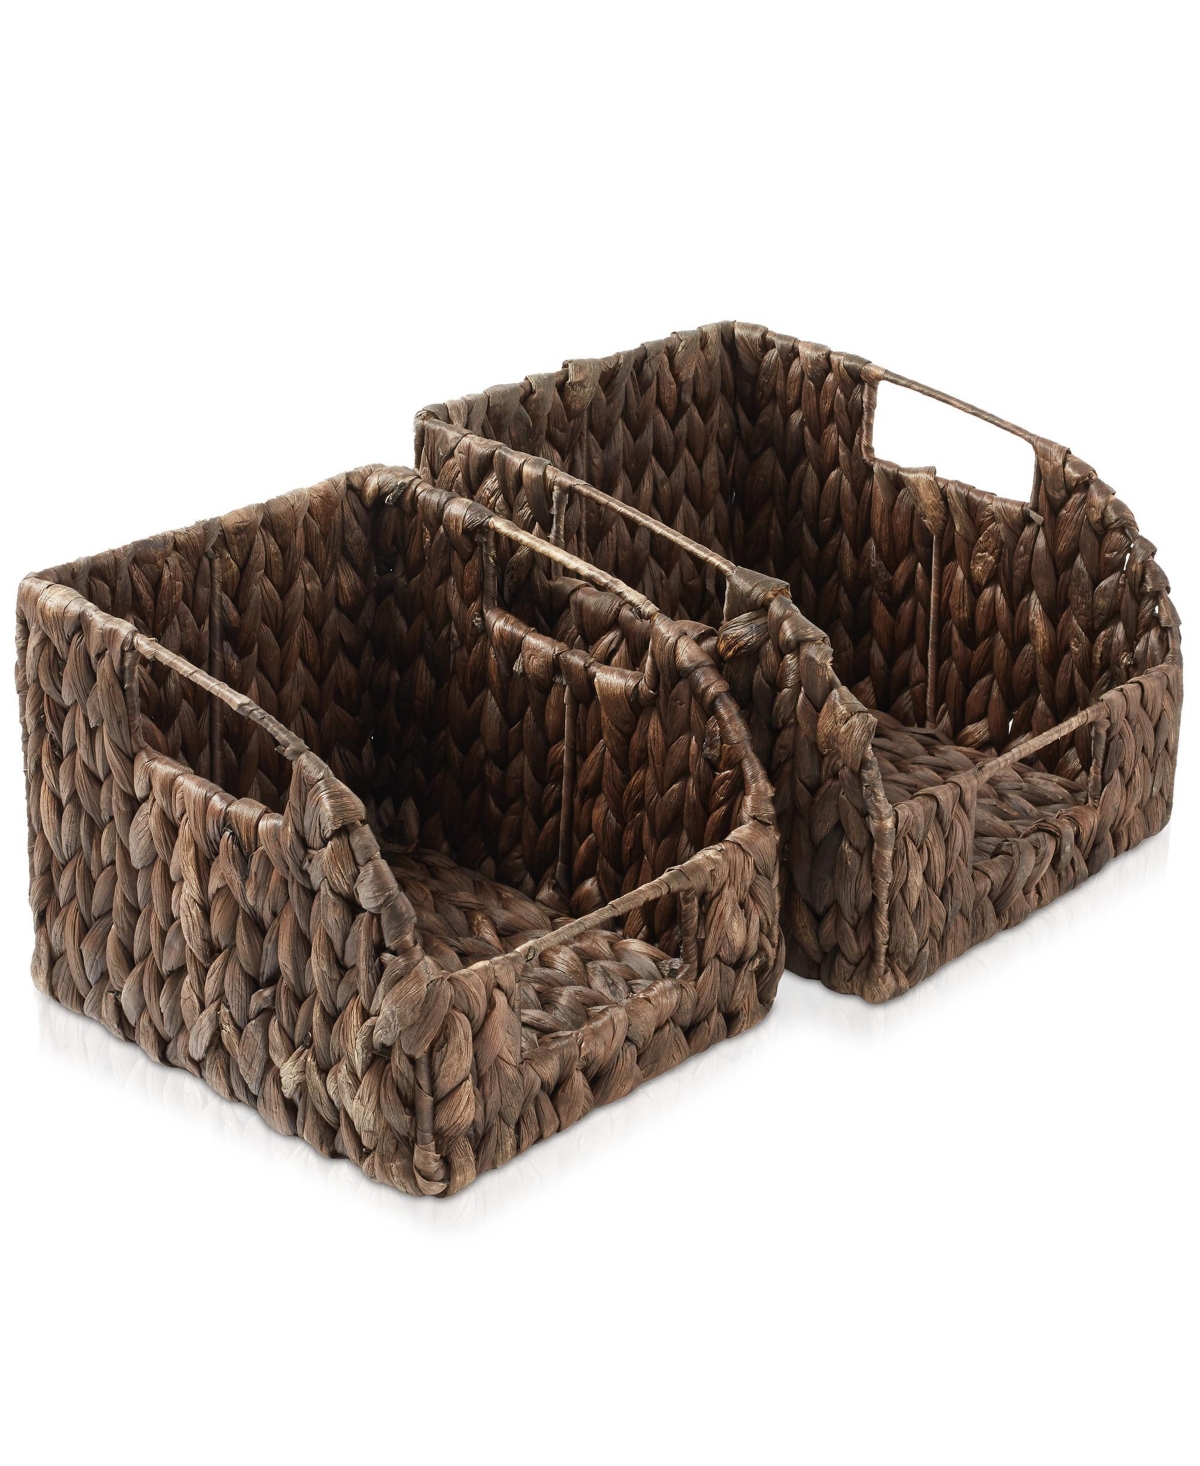 (Set of 2) Water Hyacinth Pantry Baskets with Handles - Natural, Medium and Large Size Woven Storage Baskets for Kitchen Shelves - Natural -